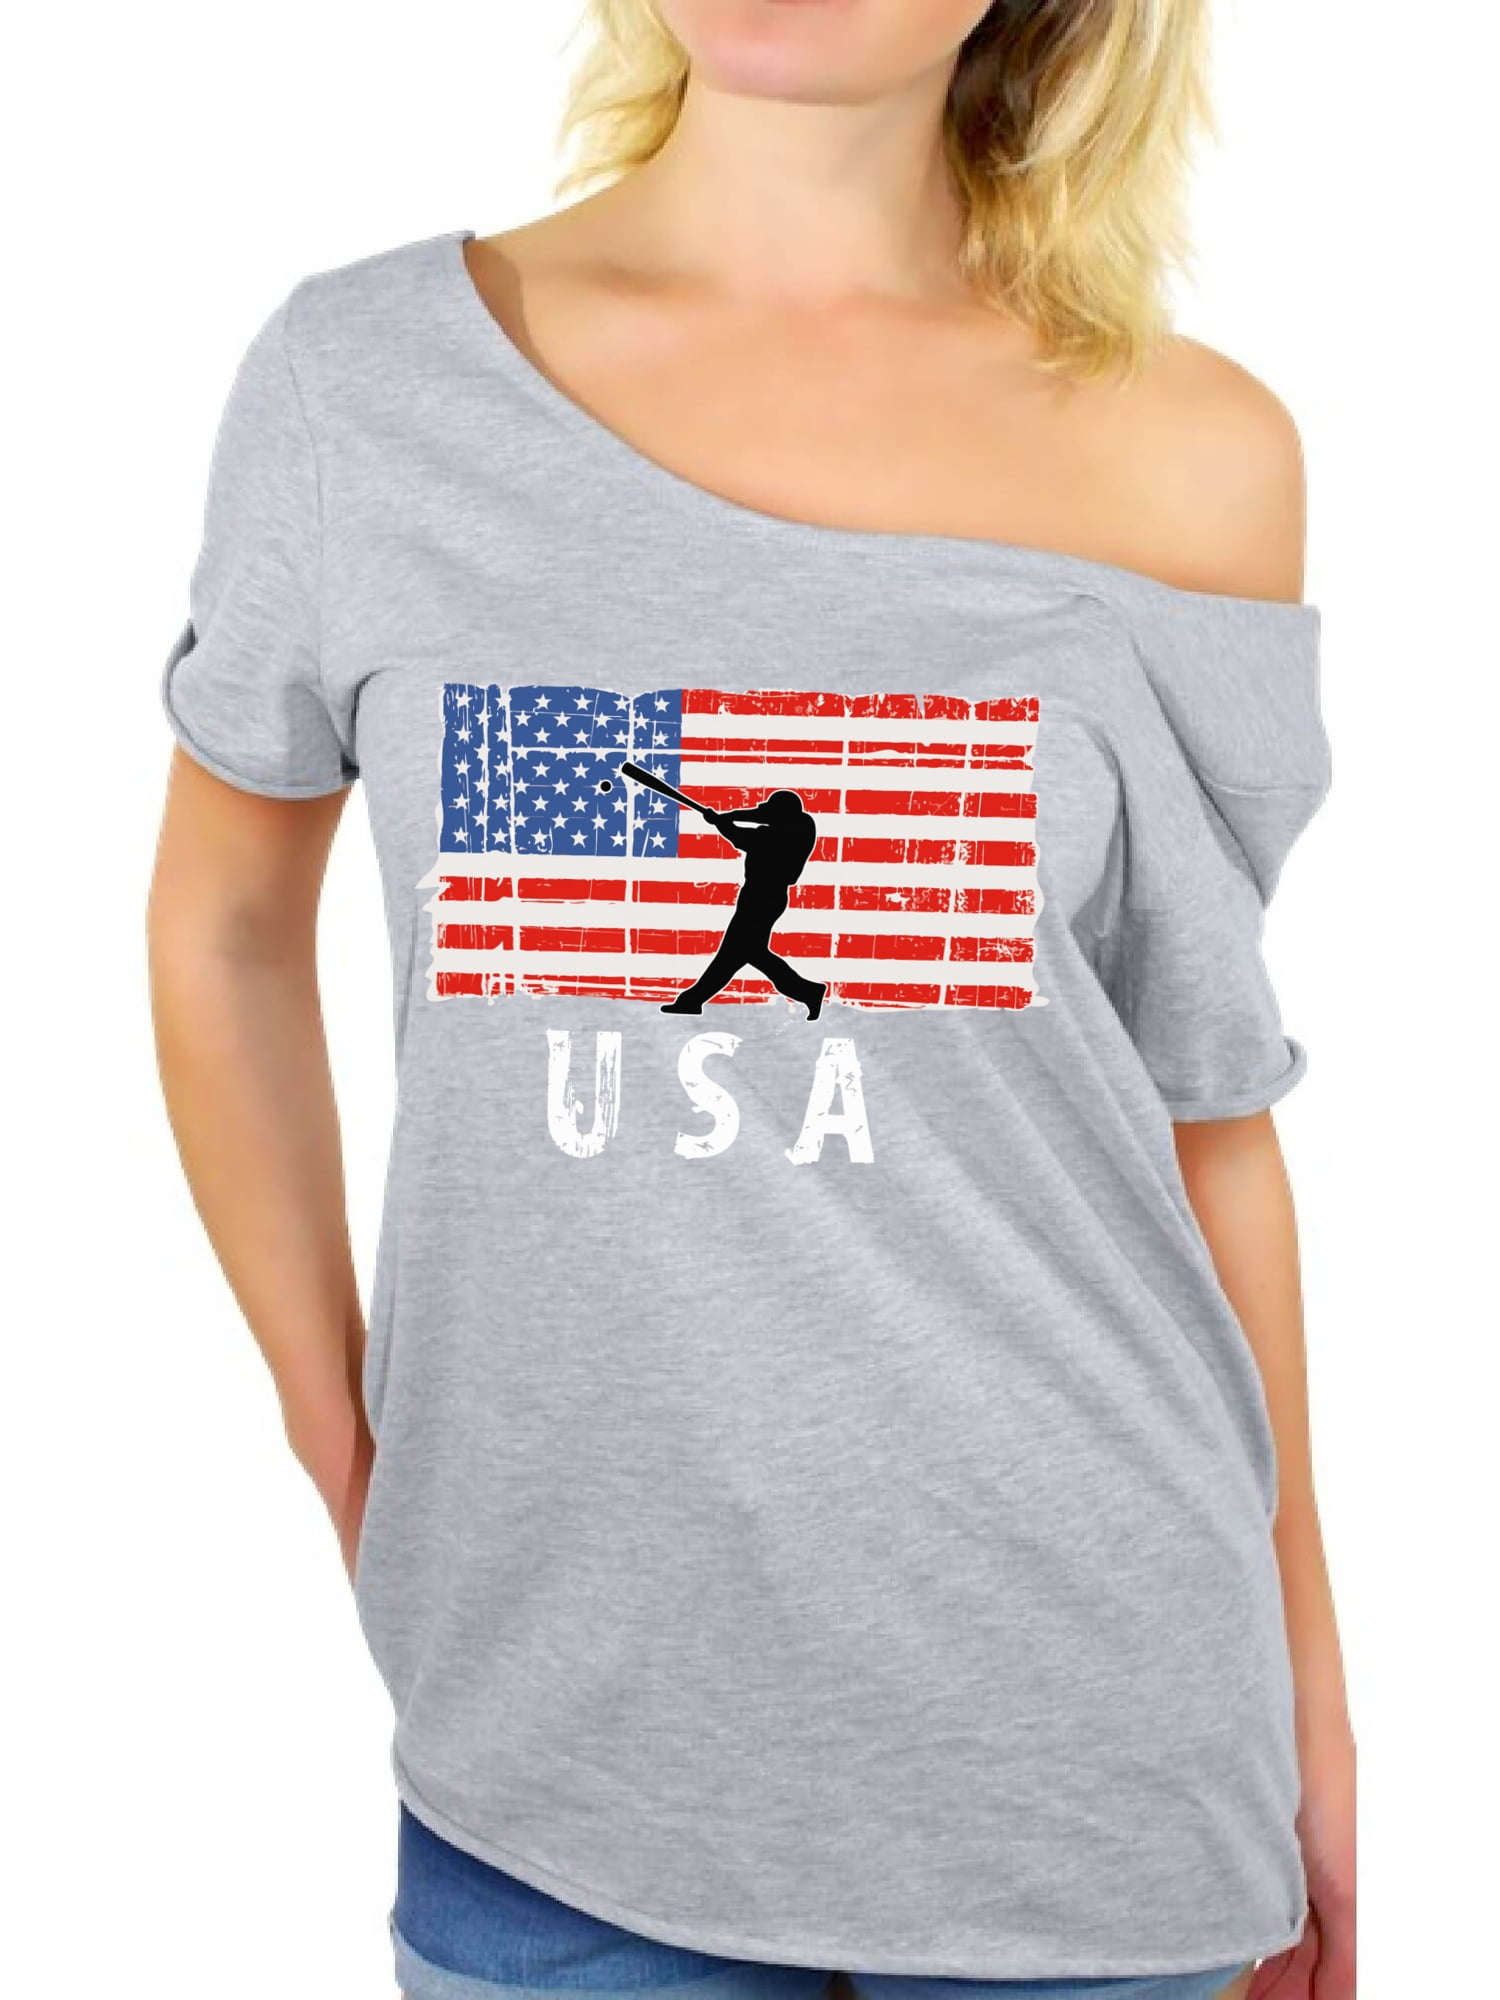 Off The Shoulder Top American Flag Patriotic Awkward Styles USA Shirts for Women 4th of July 